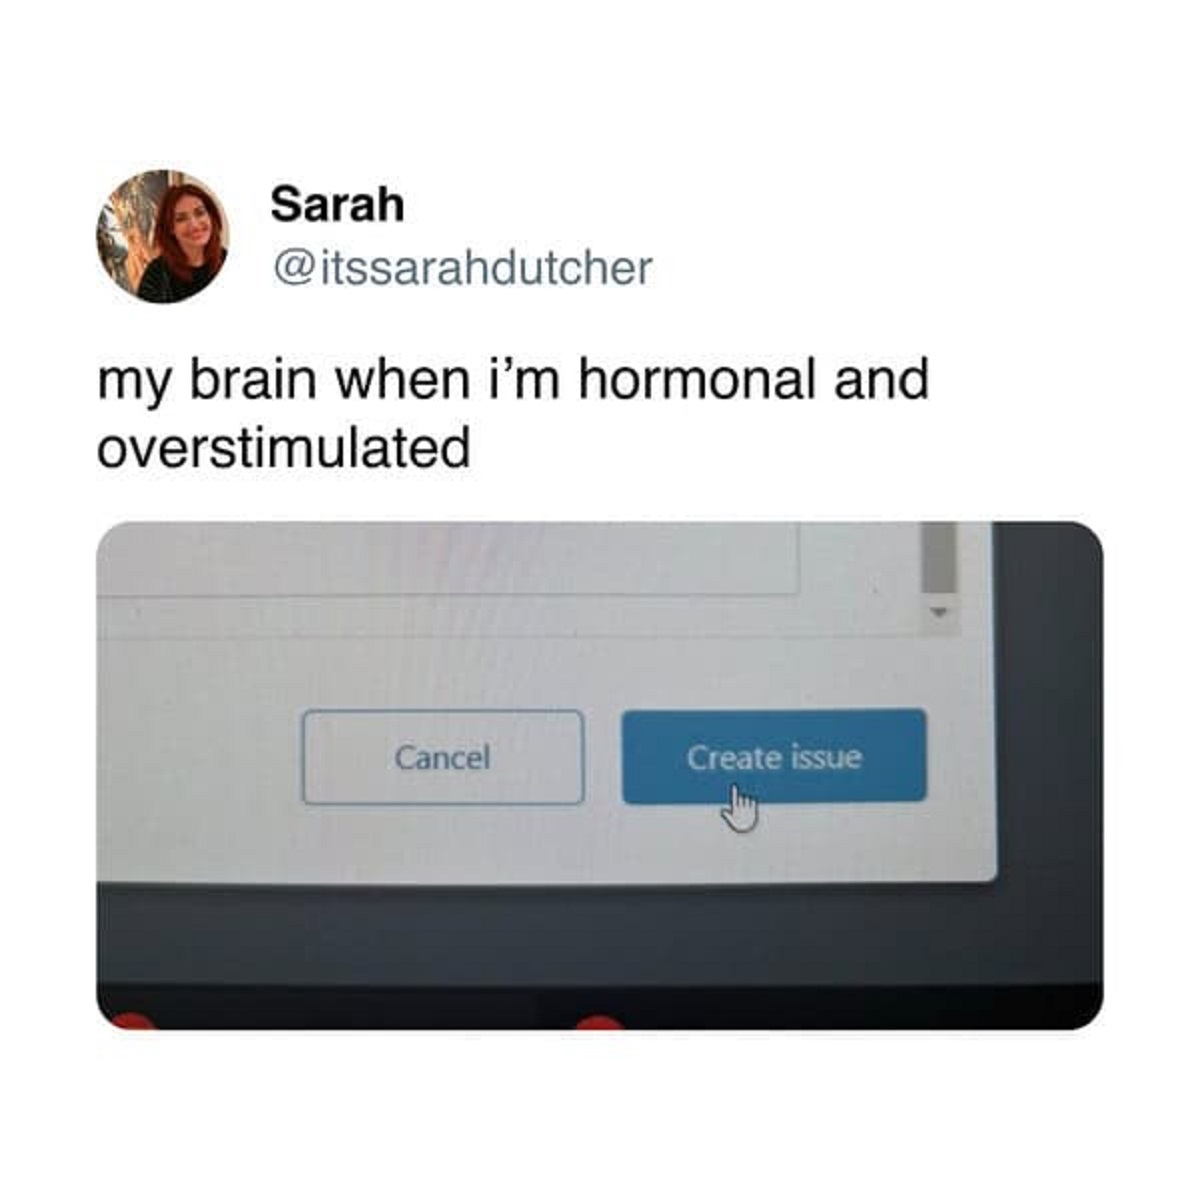 electronics - Sarah my brain when i'm hormonal and overstimulated Cancel Create issue